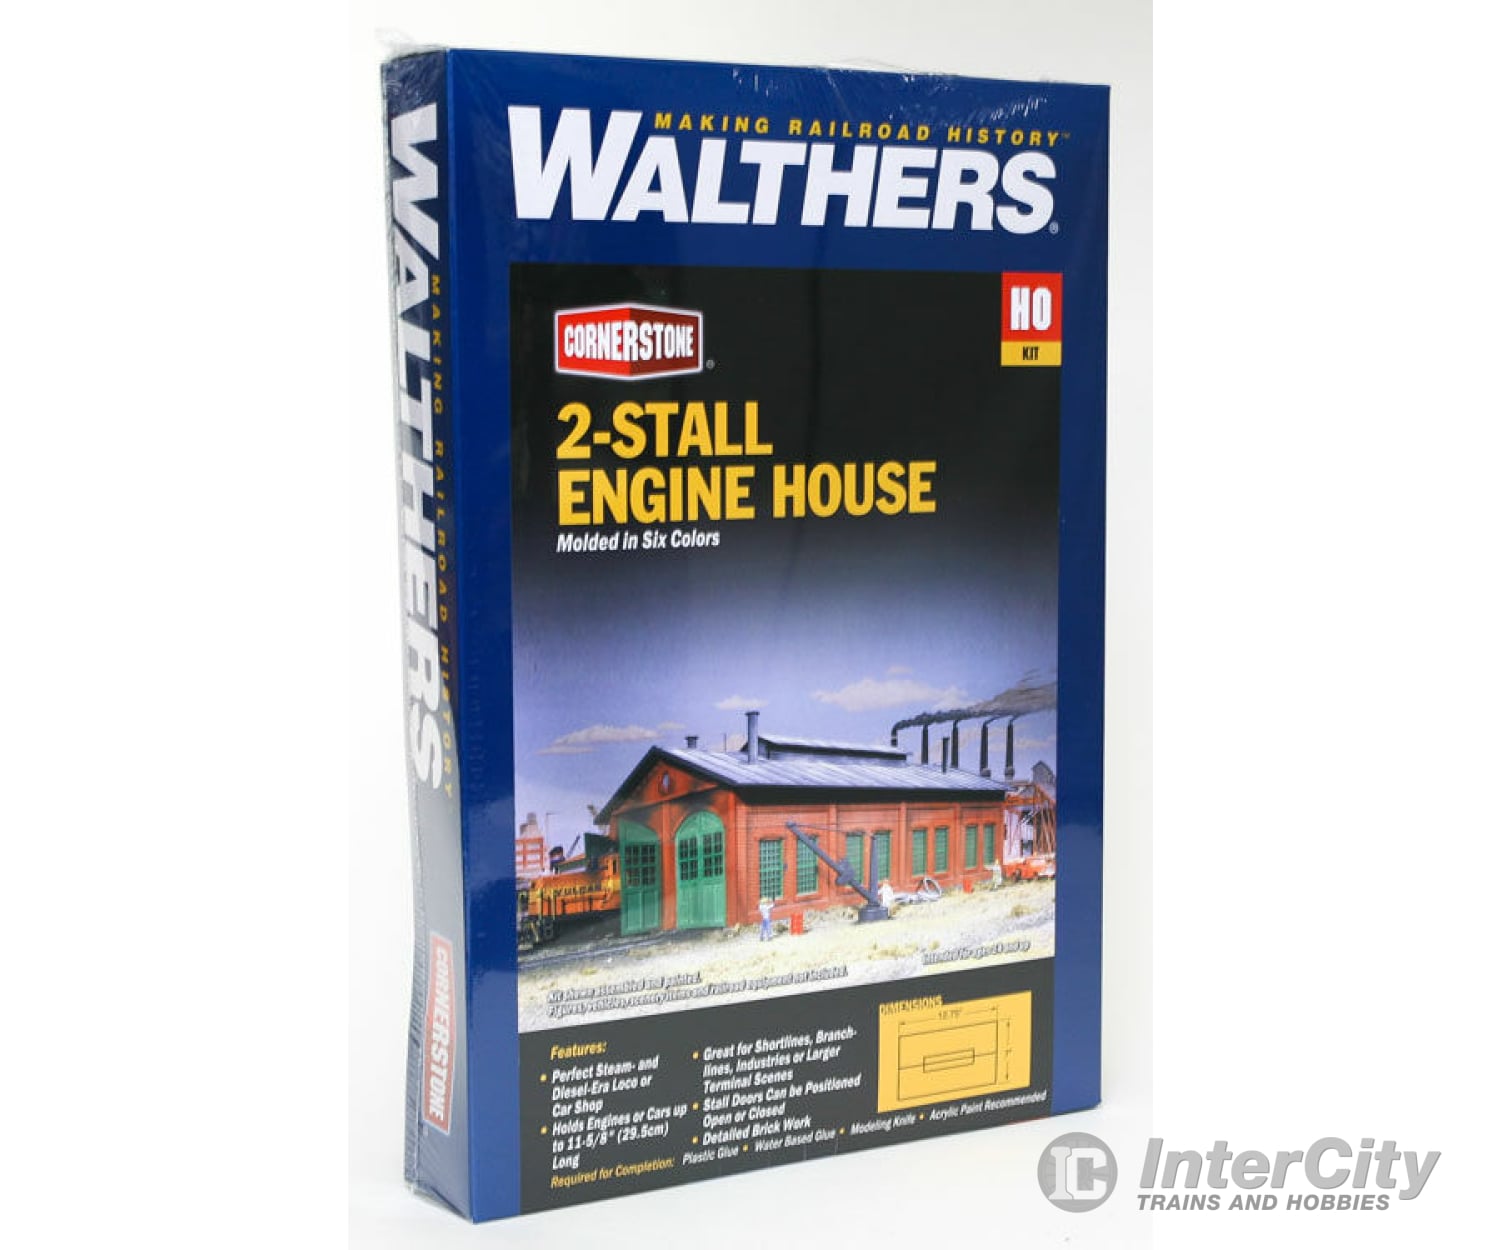 Walthers Cornerstone Ho 3007 2-Stall Enginehouse -- Kit - 12-3/4 X 7 5-1/4 31.8 17.5 13.1Cm Holds